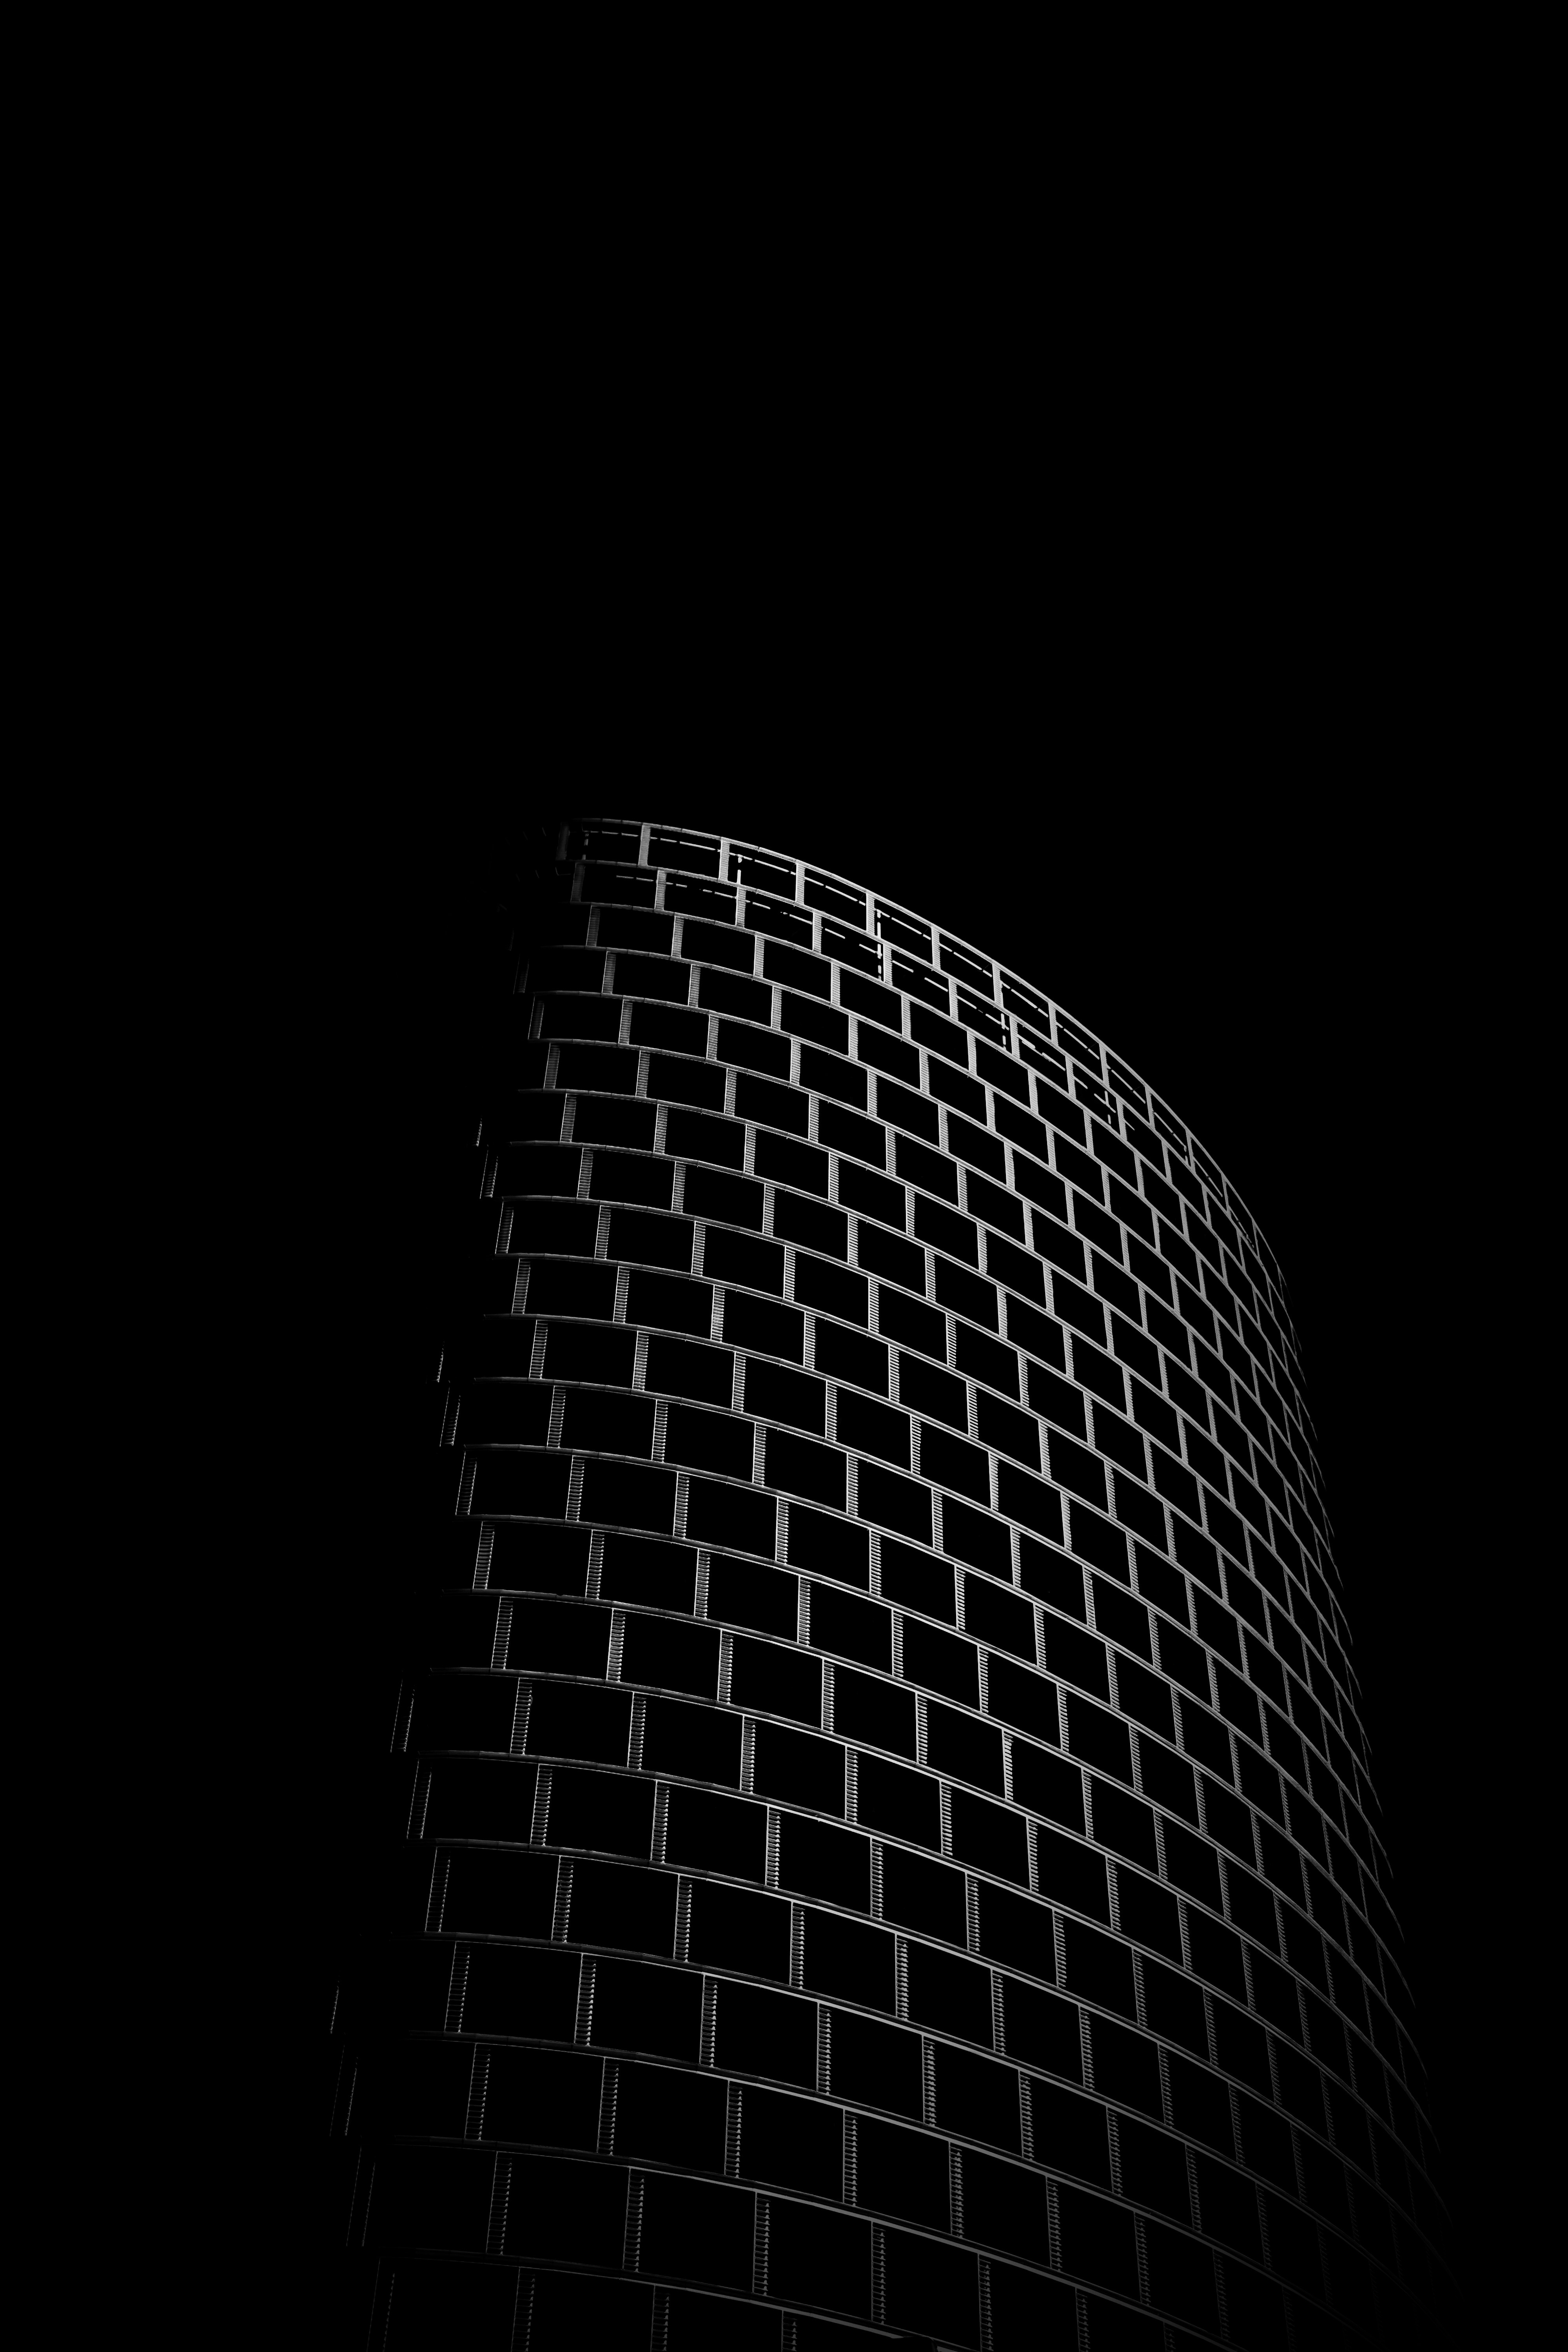 AMOLED Wallpapers [Free Download!] | 100+ best free wallpaper, black and  white, black, and dark photos on Unsplash